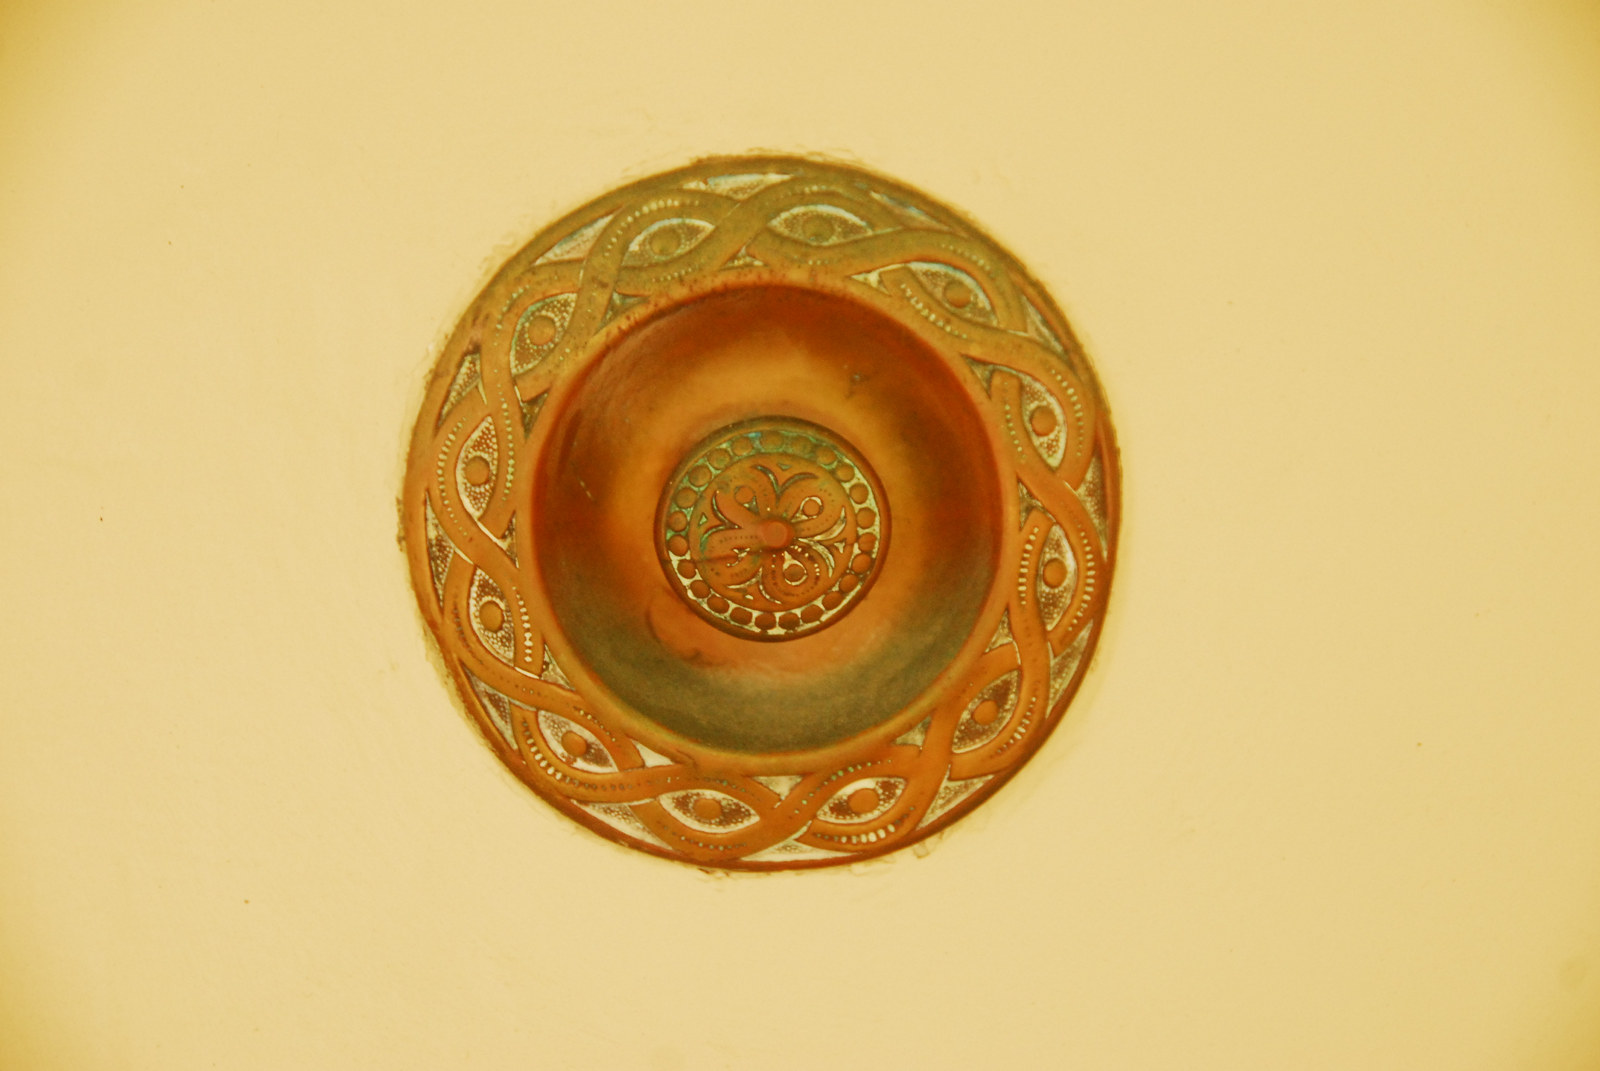 Closeup of ornately decorated doorbell.